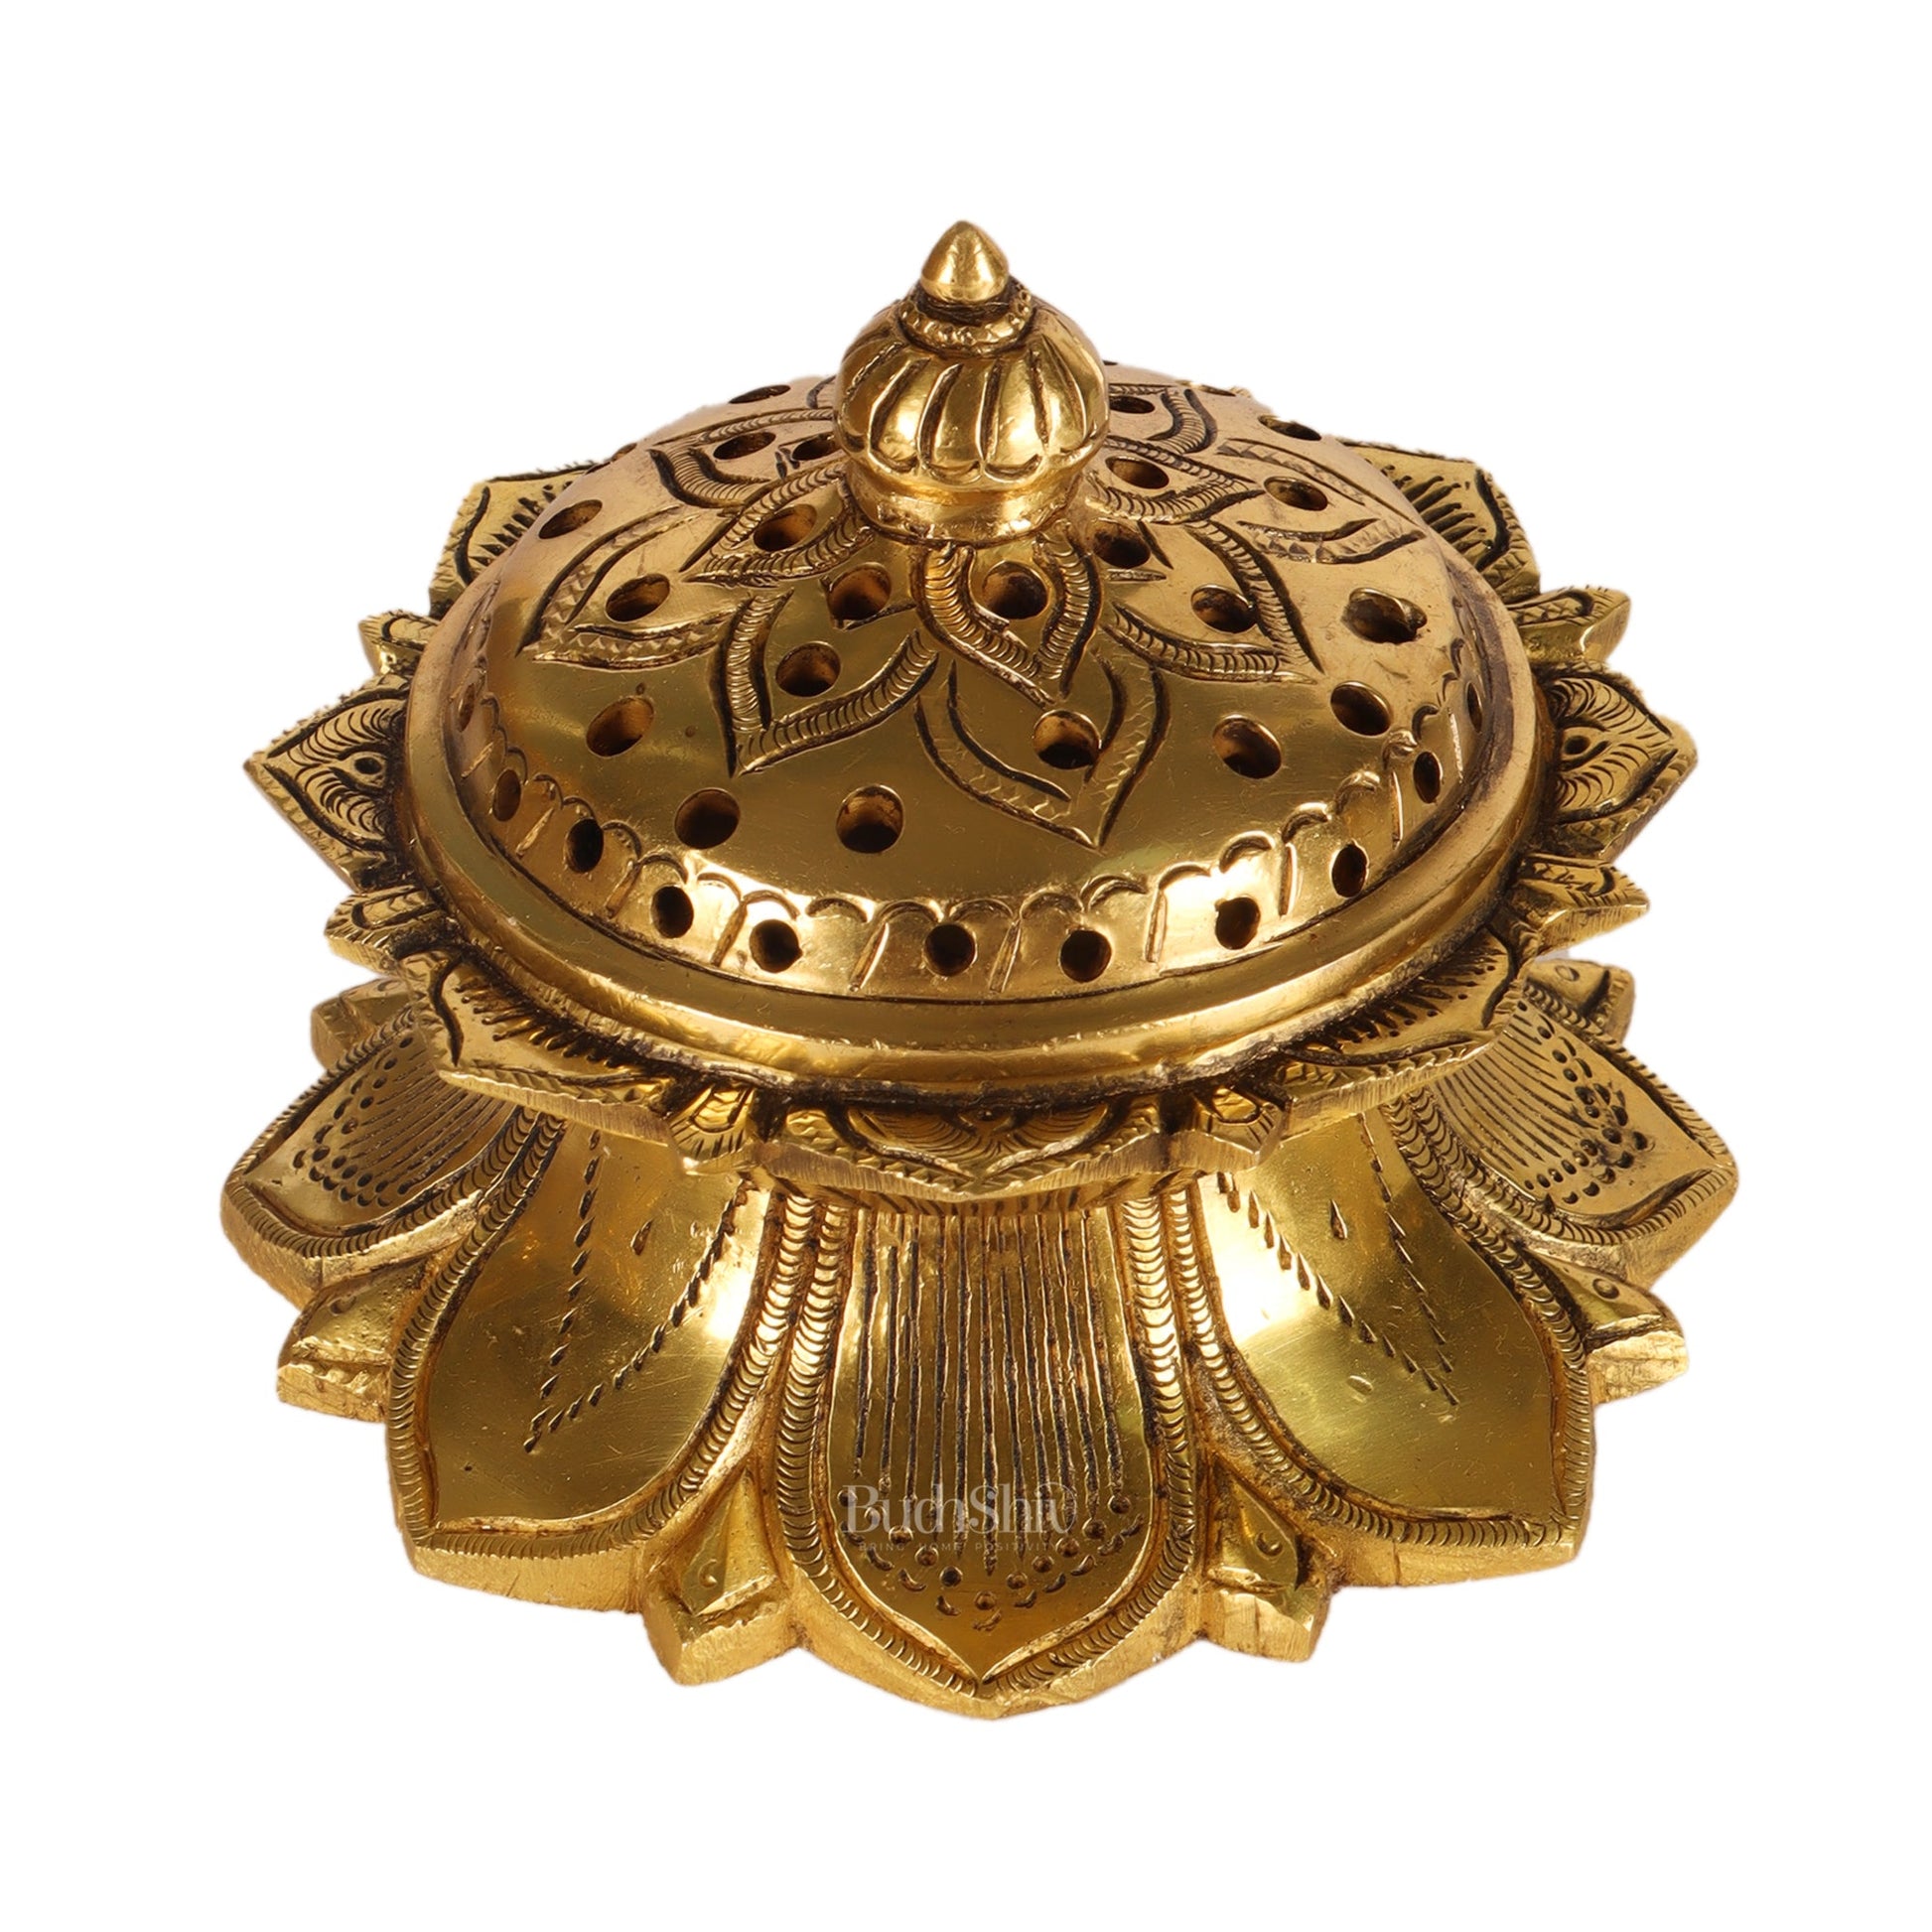 Brass Dhoop Burner and Incense Charcoal Burner with Lid | Height 3.5 inches, Width 4 inches, Depth 4 inches - Budhshiv.com